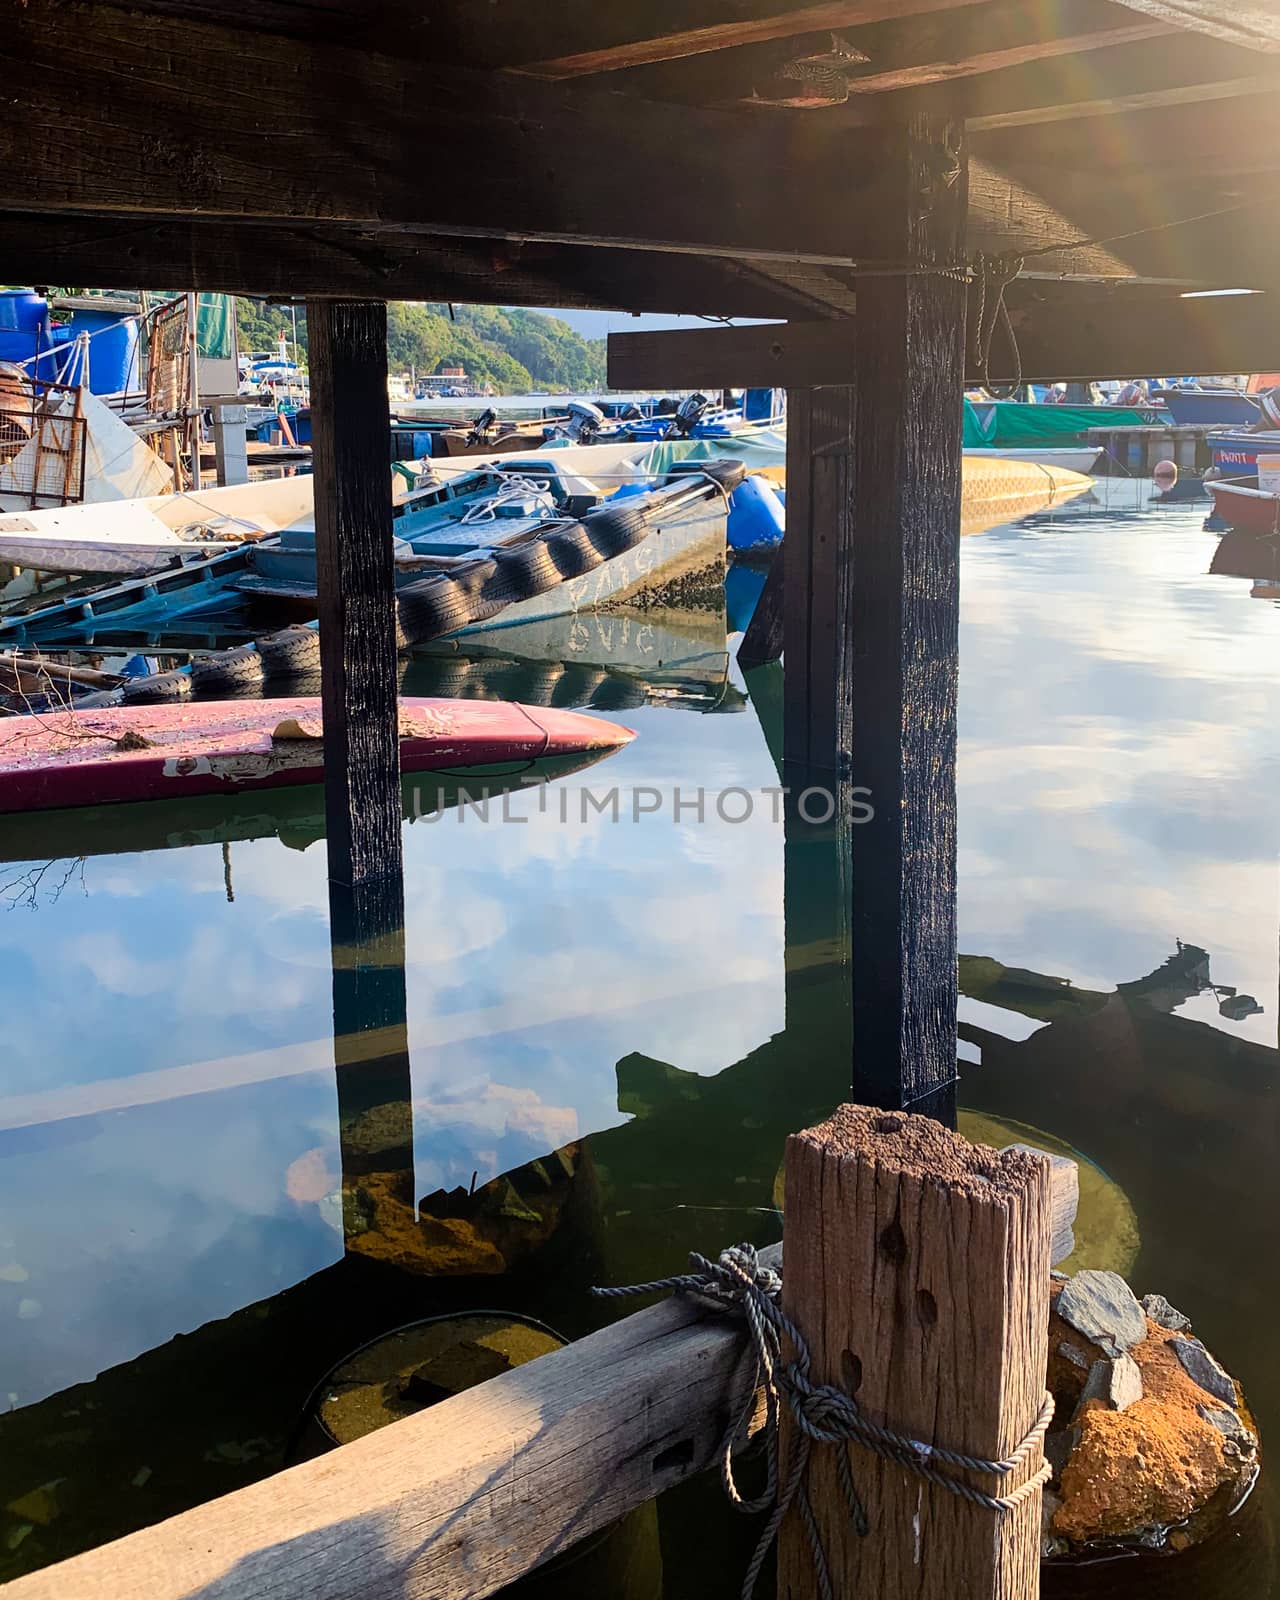 The fishing boats on the sea and wooden house in Hong Kong countryside